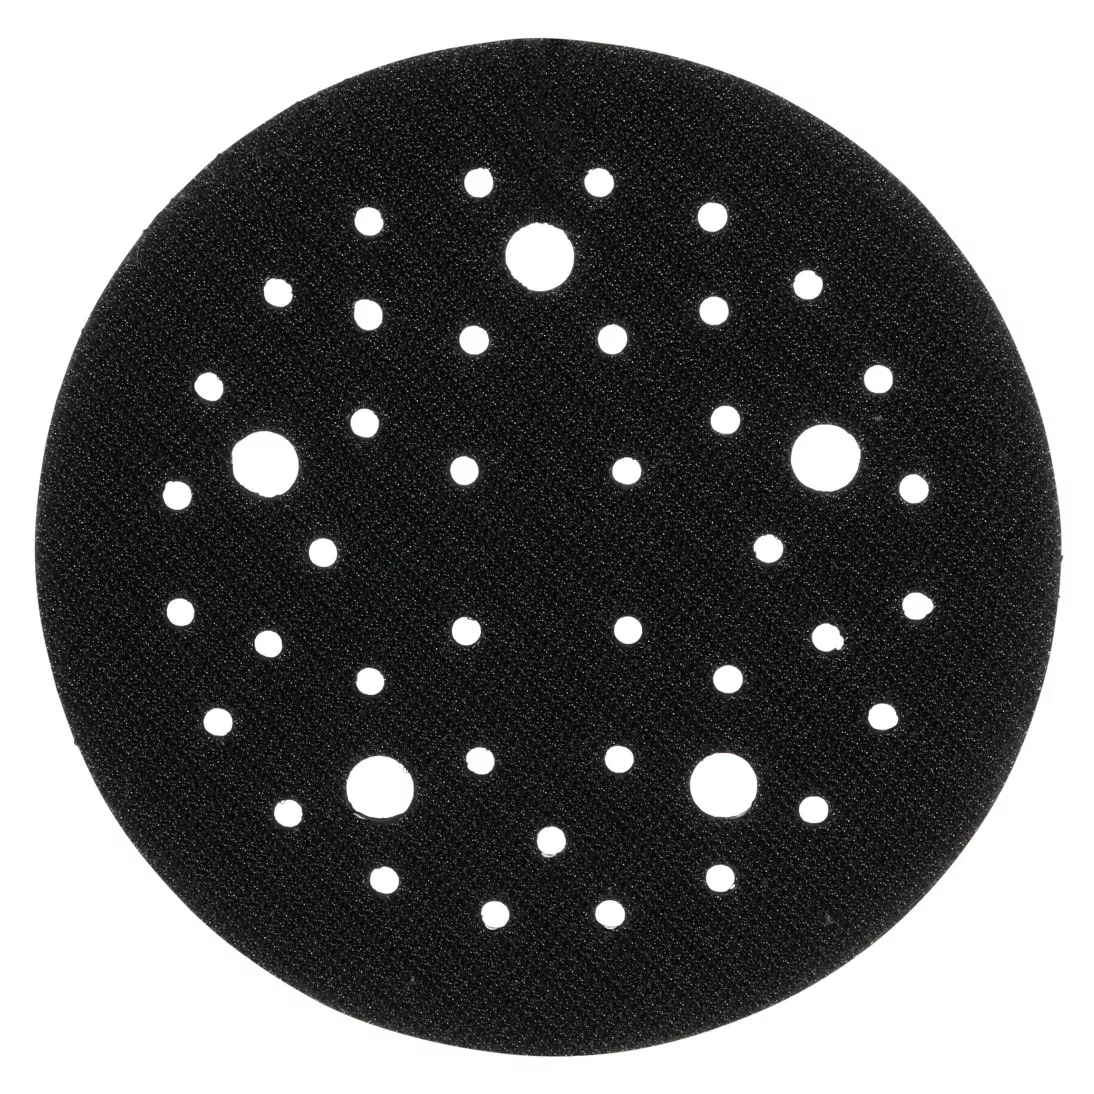 3M Xtract™ Back-up Pad, 89052, 5 in, Extra Hard, Black, 10 ea/Case